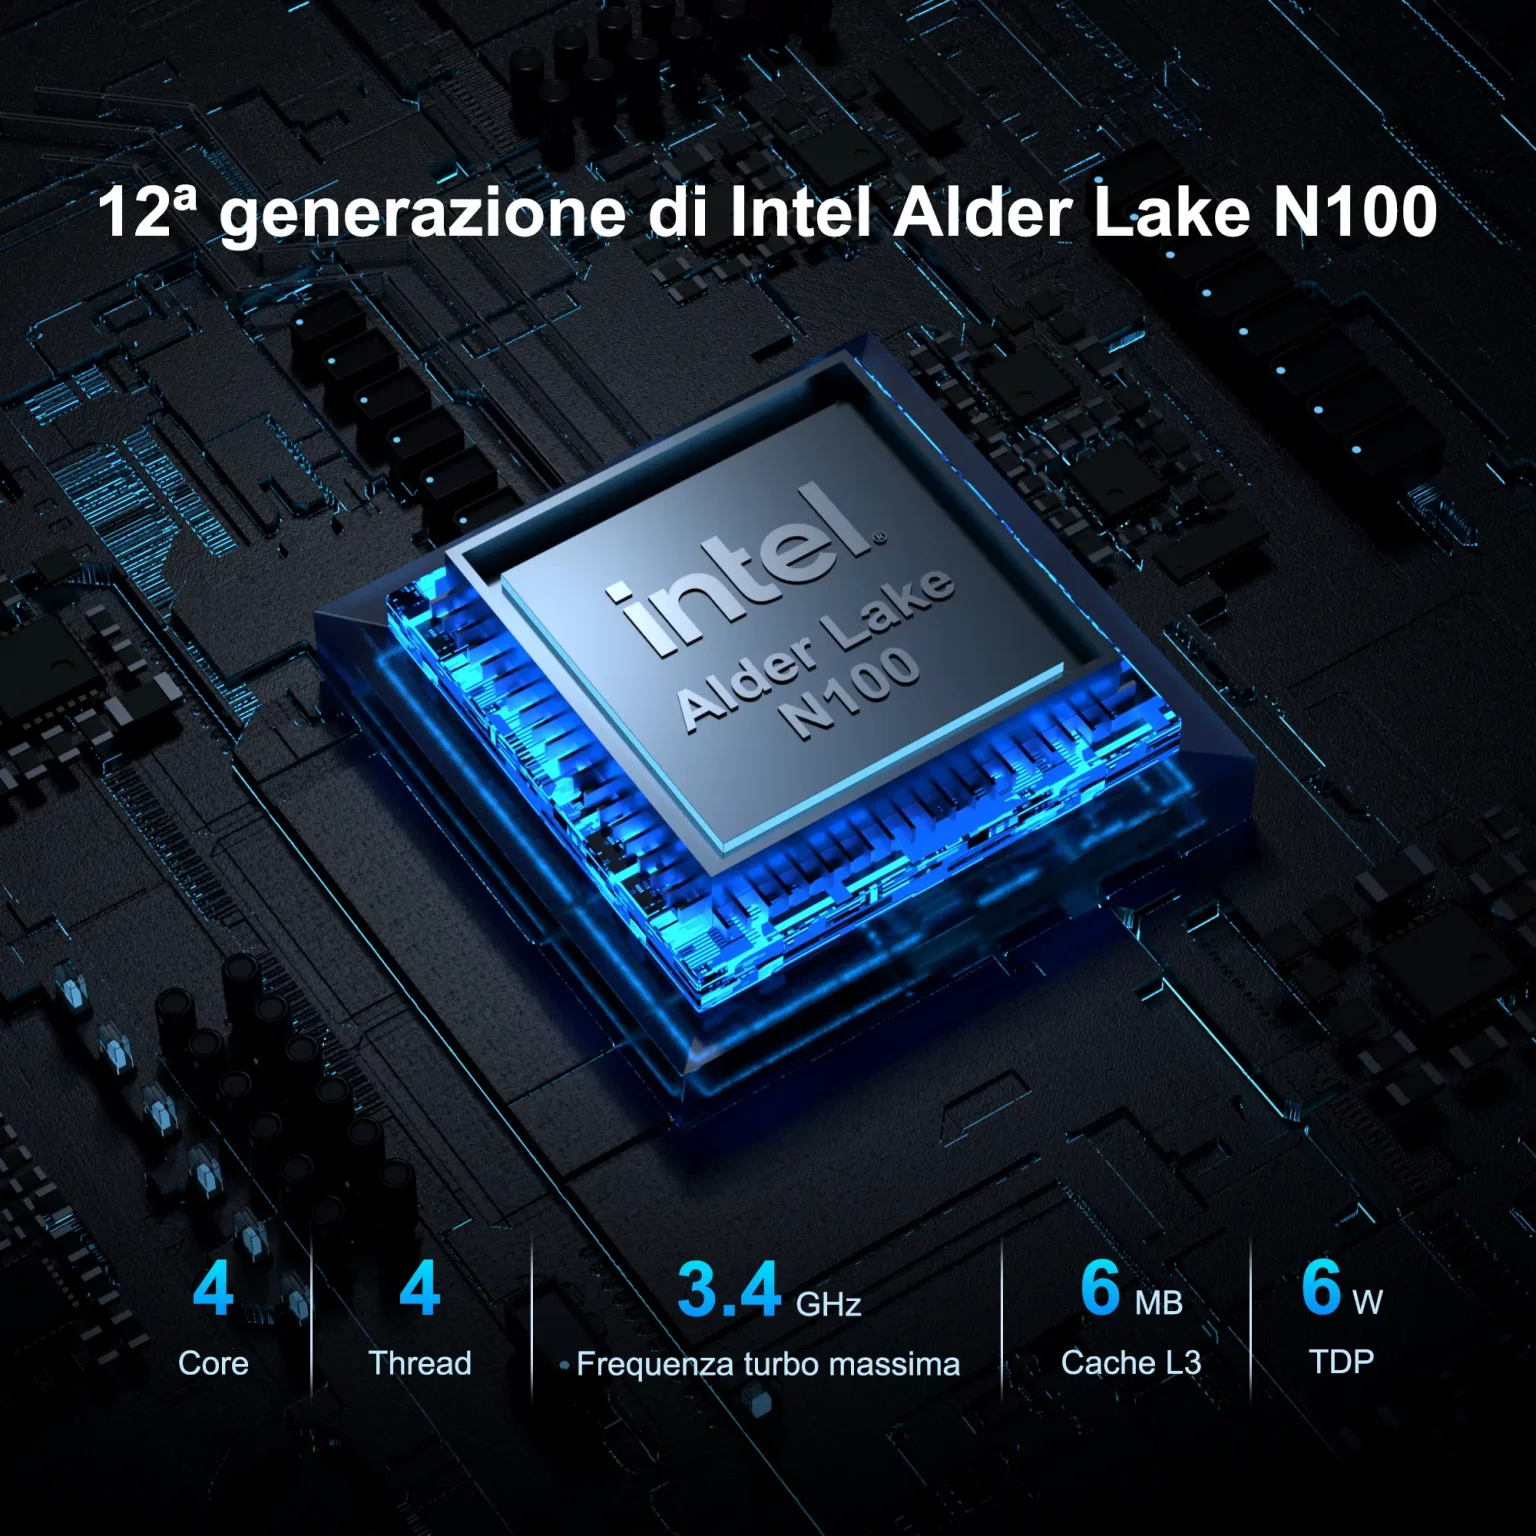 Cheap mini PCs with Intel Processor N95 Alder Lake-N chips are now